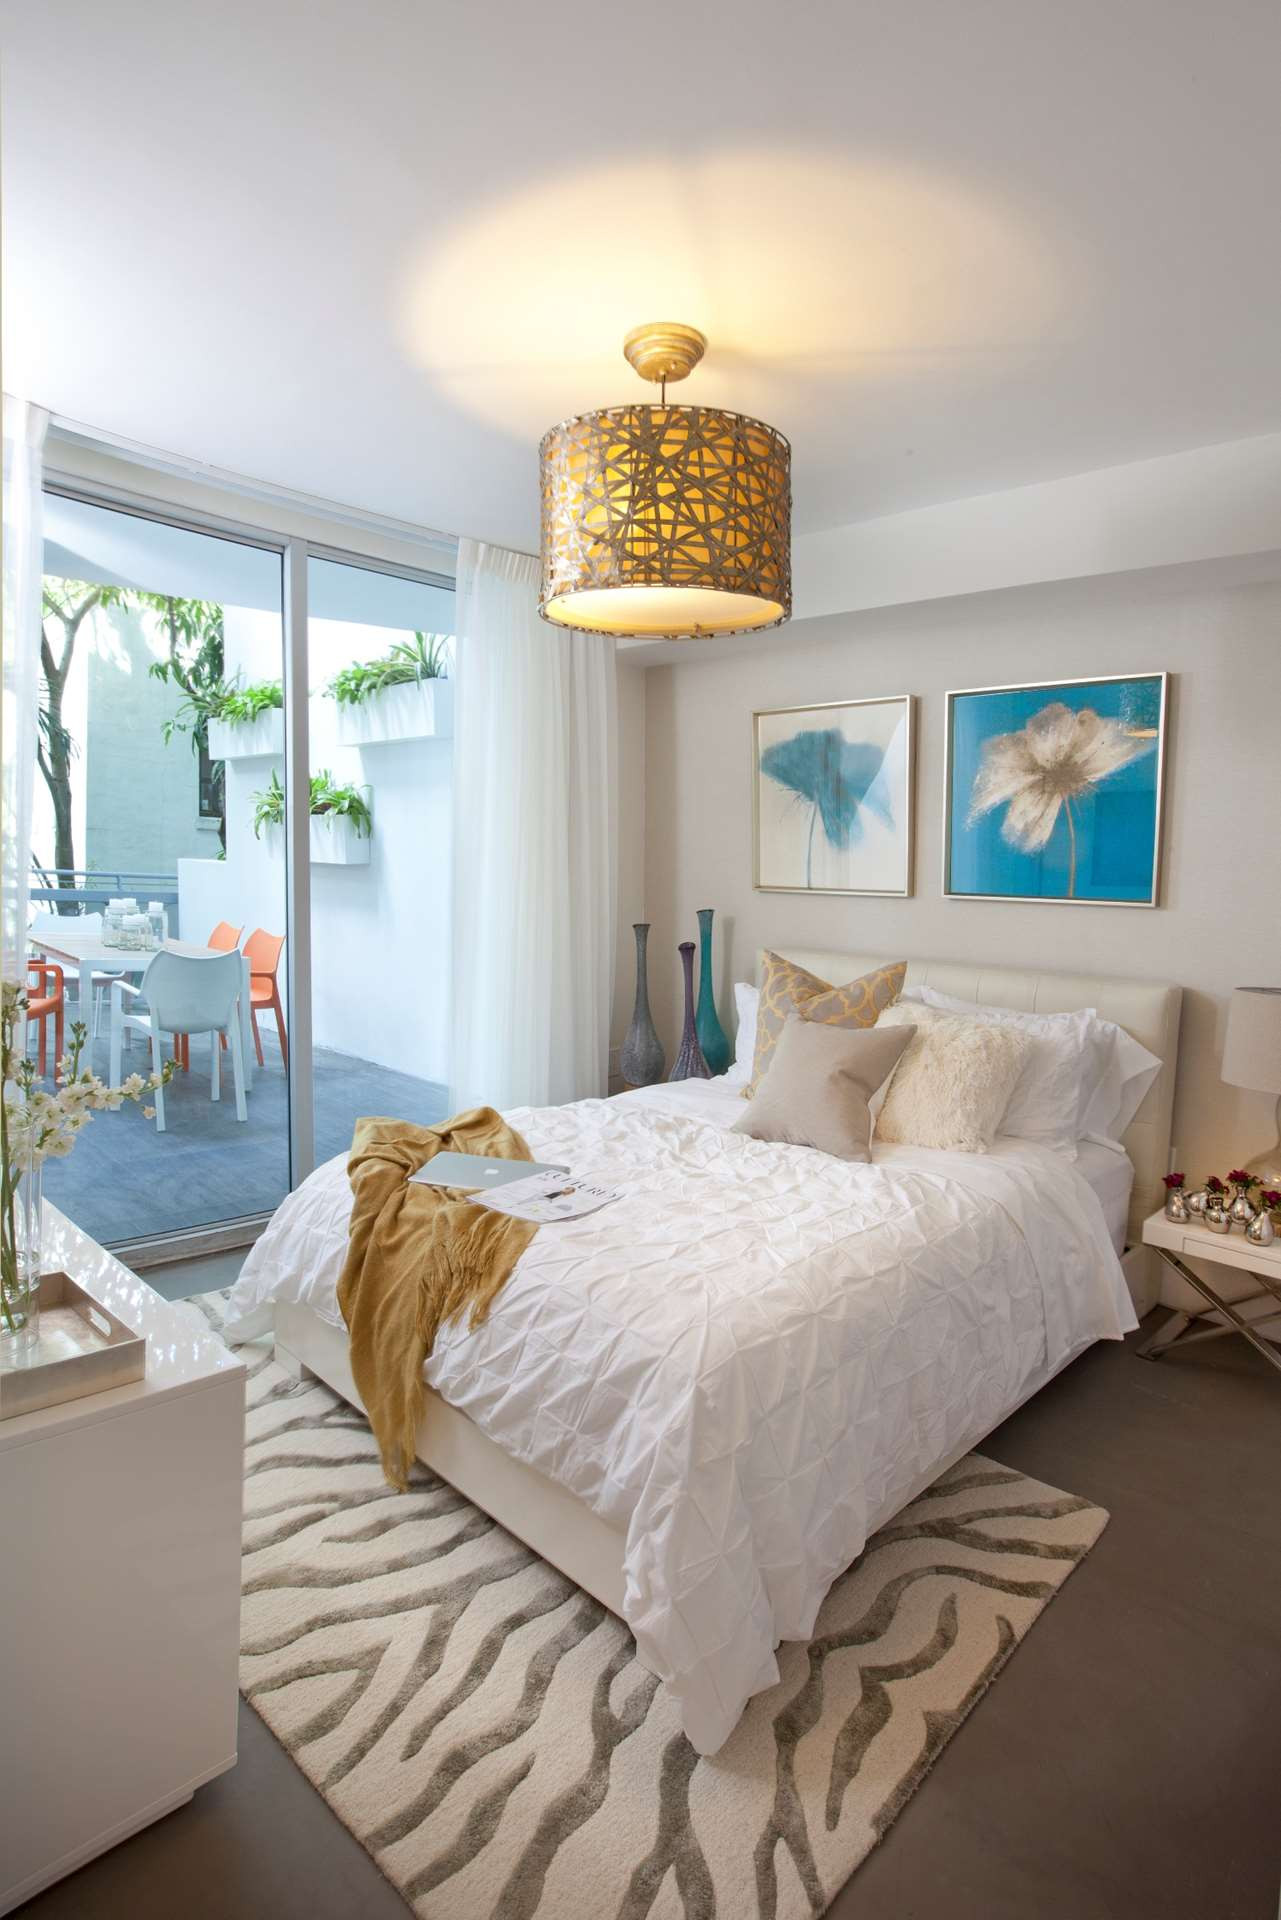 Modern Chic Bedroom Ideas
 South Beach Chic Interiors by DKOR Miami Interior Designers